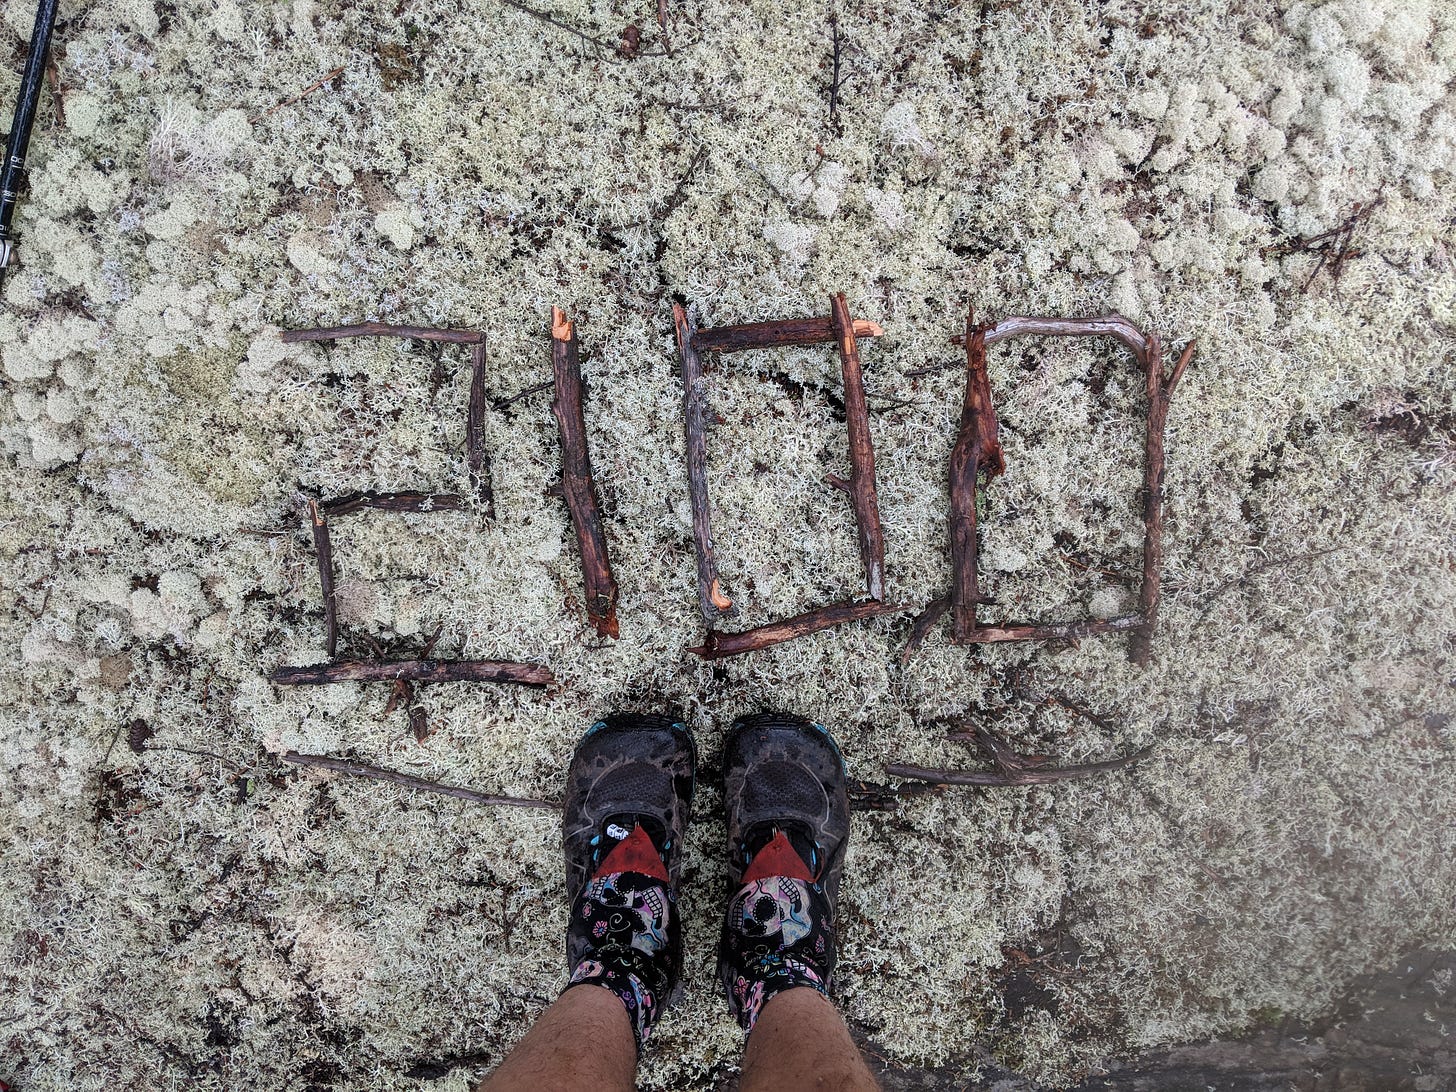 A photo of Sassafras' shoes. She's standing on a lichen-covered rock on the Appalachian Trail where someone has formed the number 2100 out of sticks.